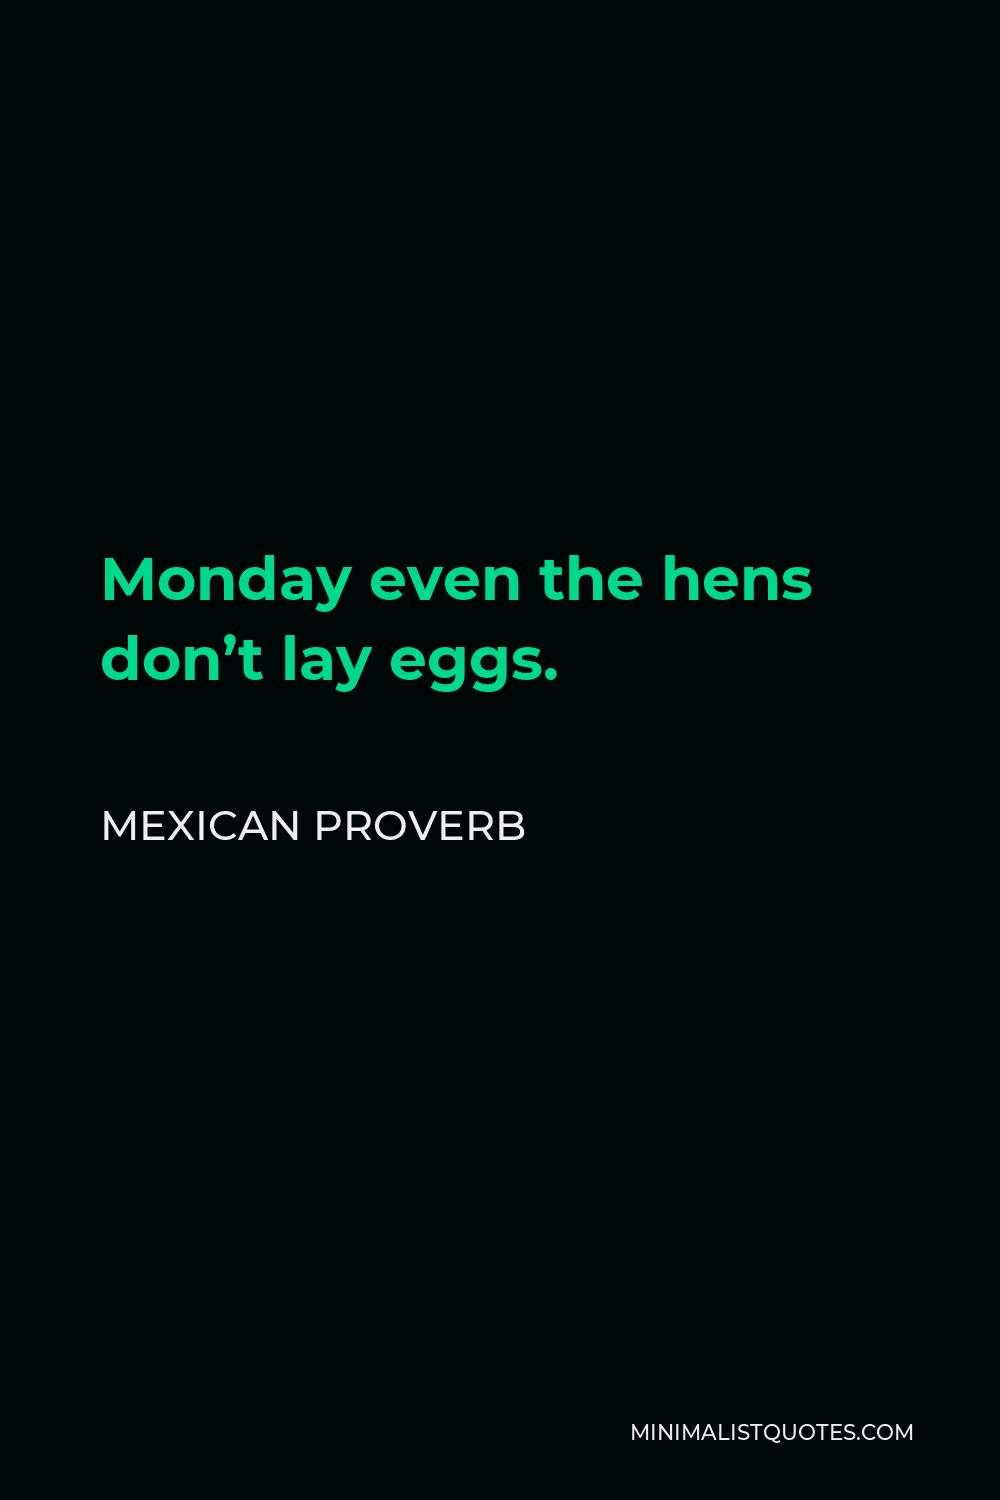 Mexican Proverb Quote - Monday even the hens don’t lay eggs.